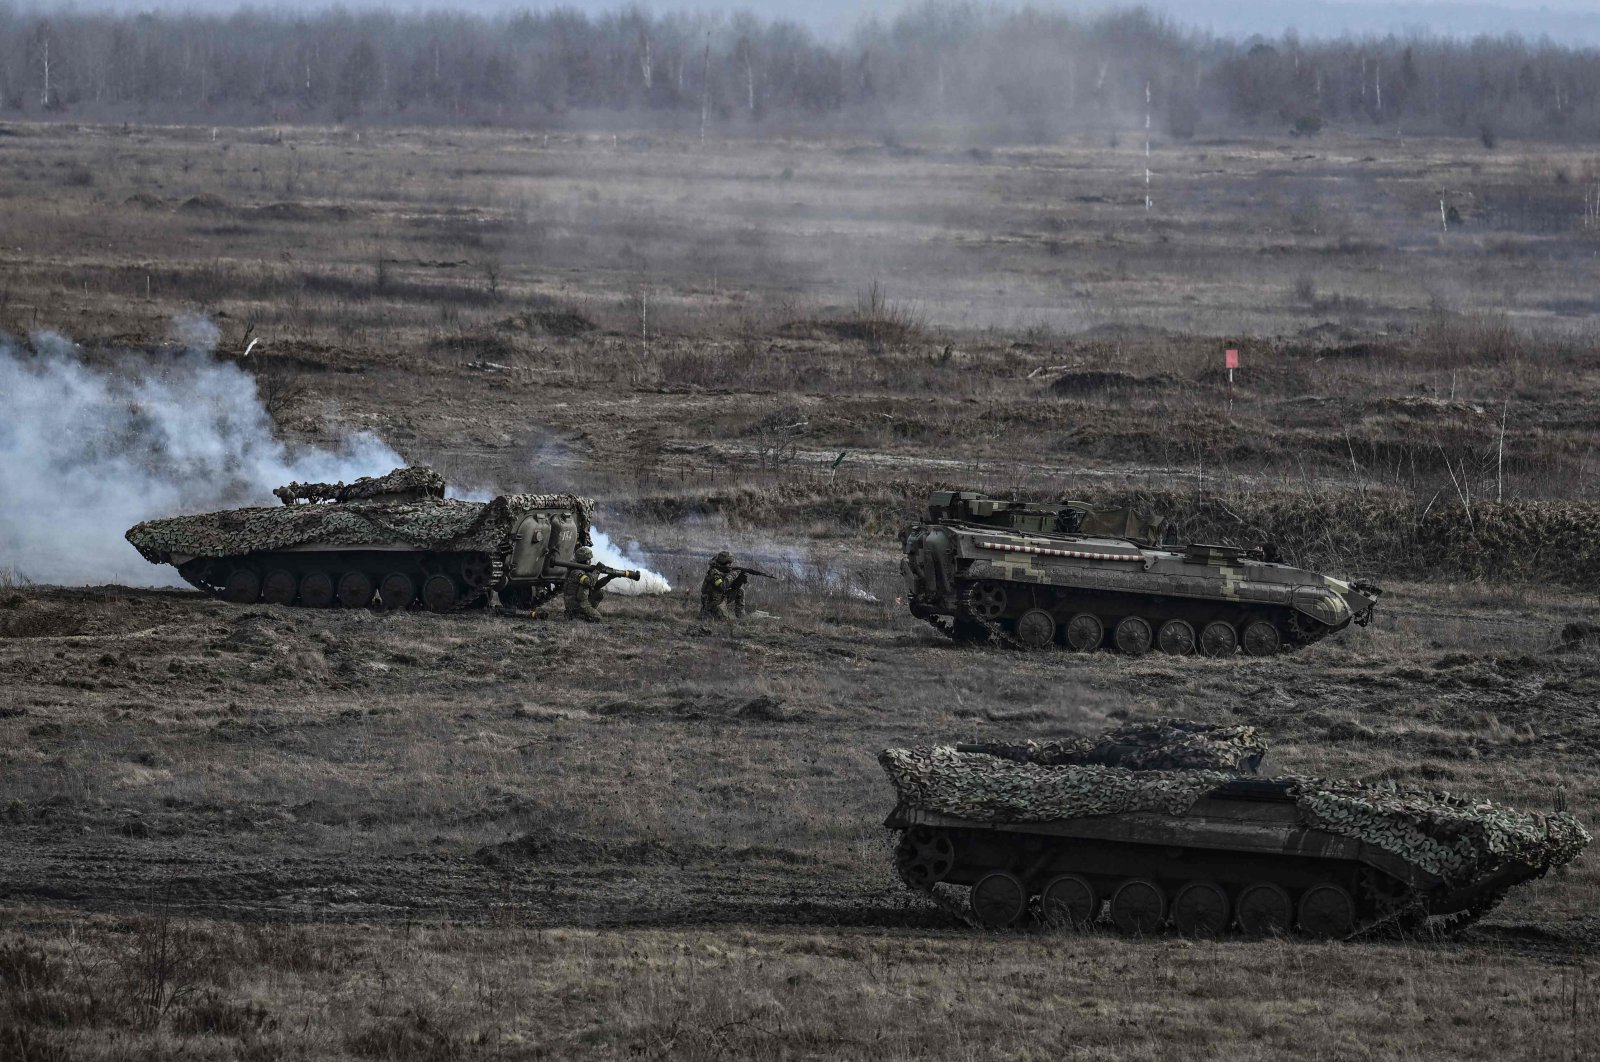 Ukrainian troops take part in a military drill outside the city of Rivne, western Ukraine, Feb. 16, 2022. (AFP Photo)